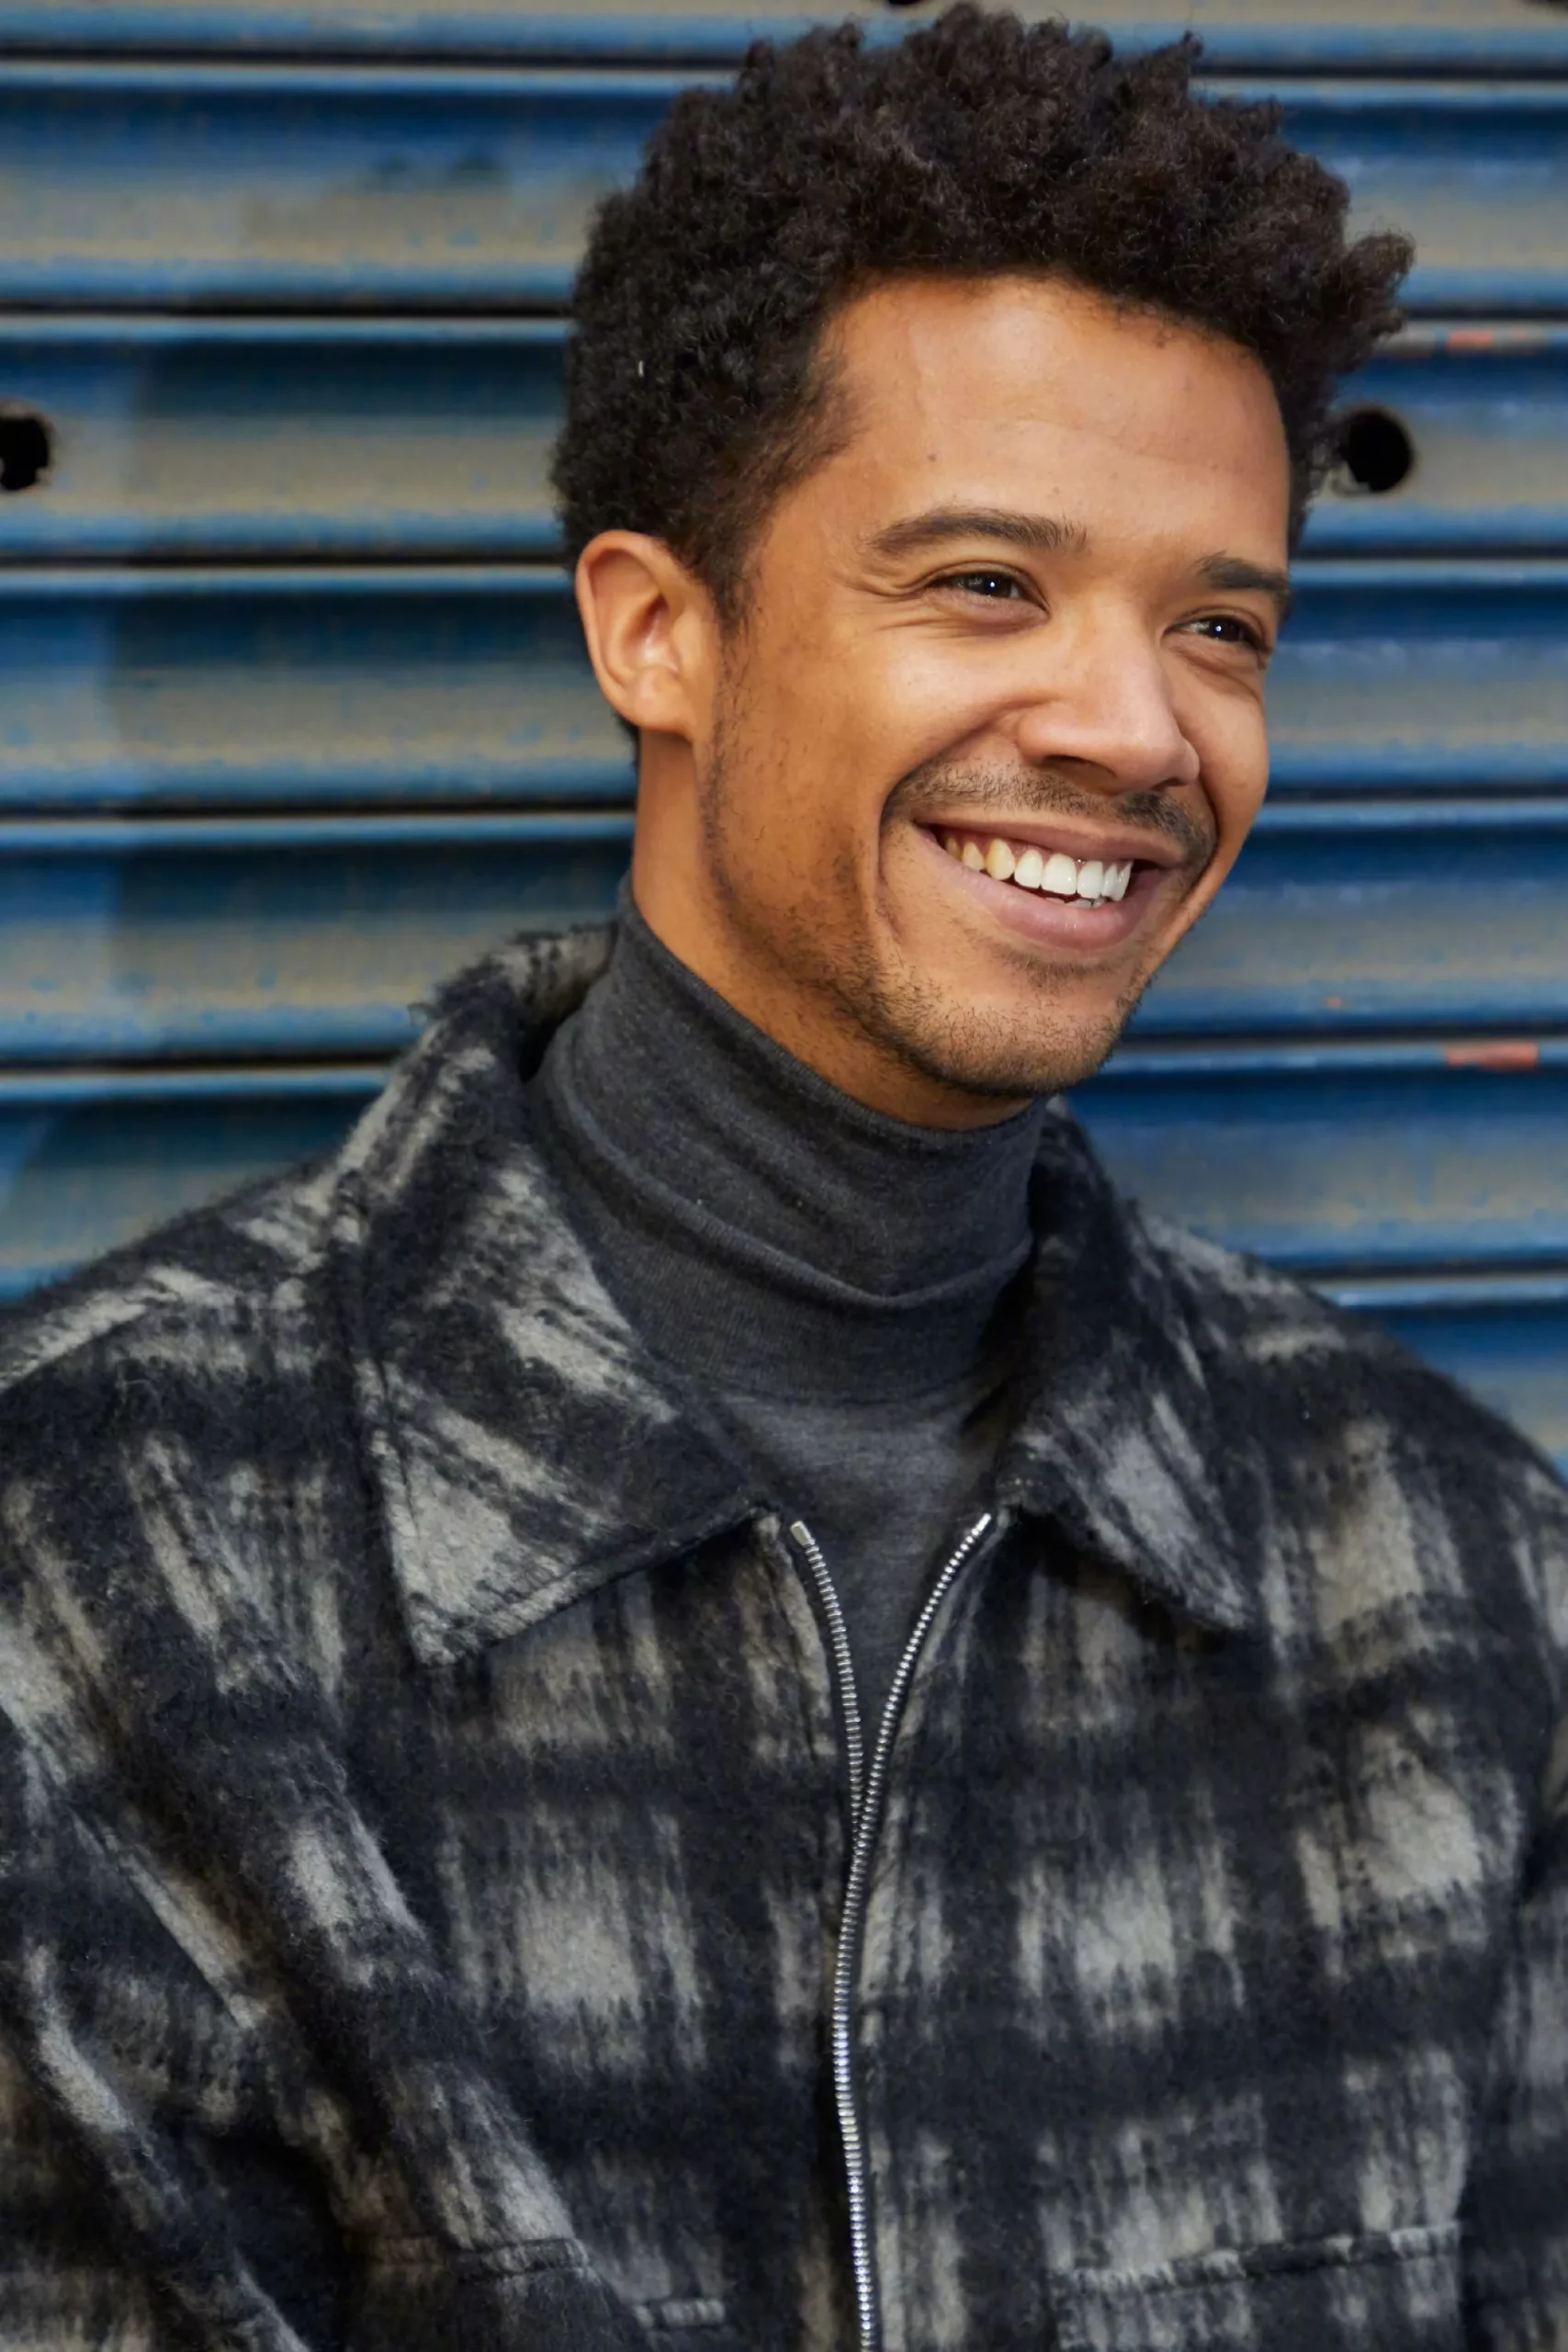 Drama version 'Interview with the Vampire' starring Sam Reid and Jacob Anderson, new photo for 'Esquire' magazine | FMV6